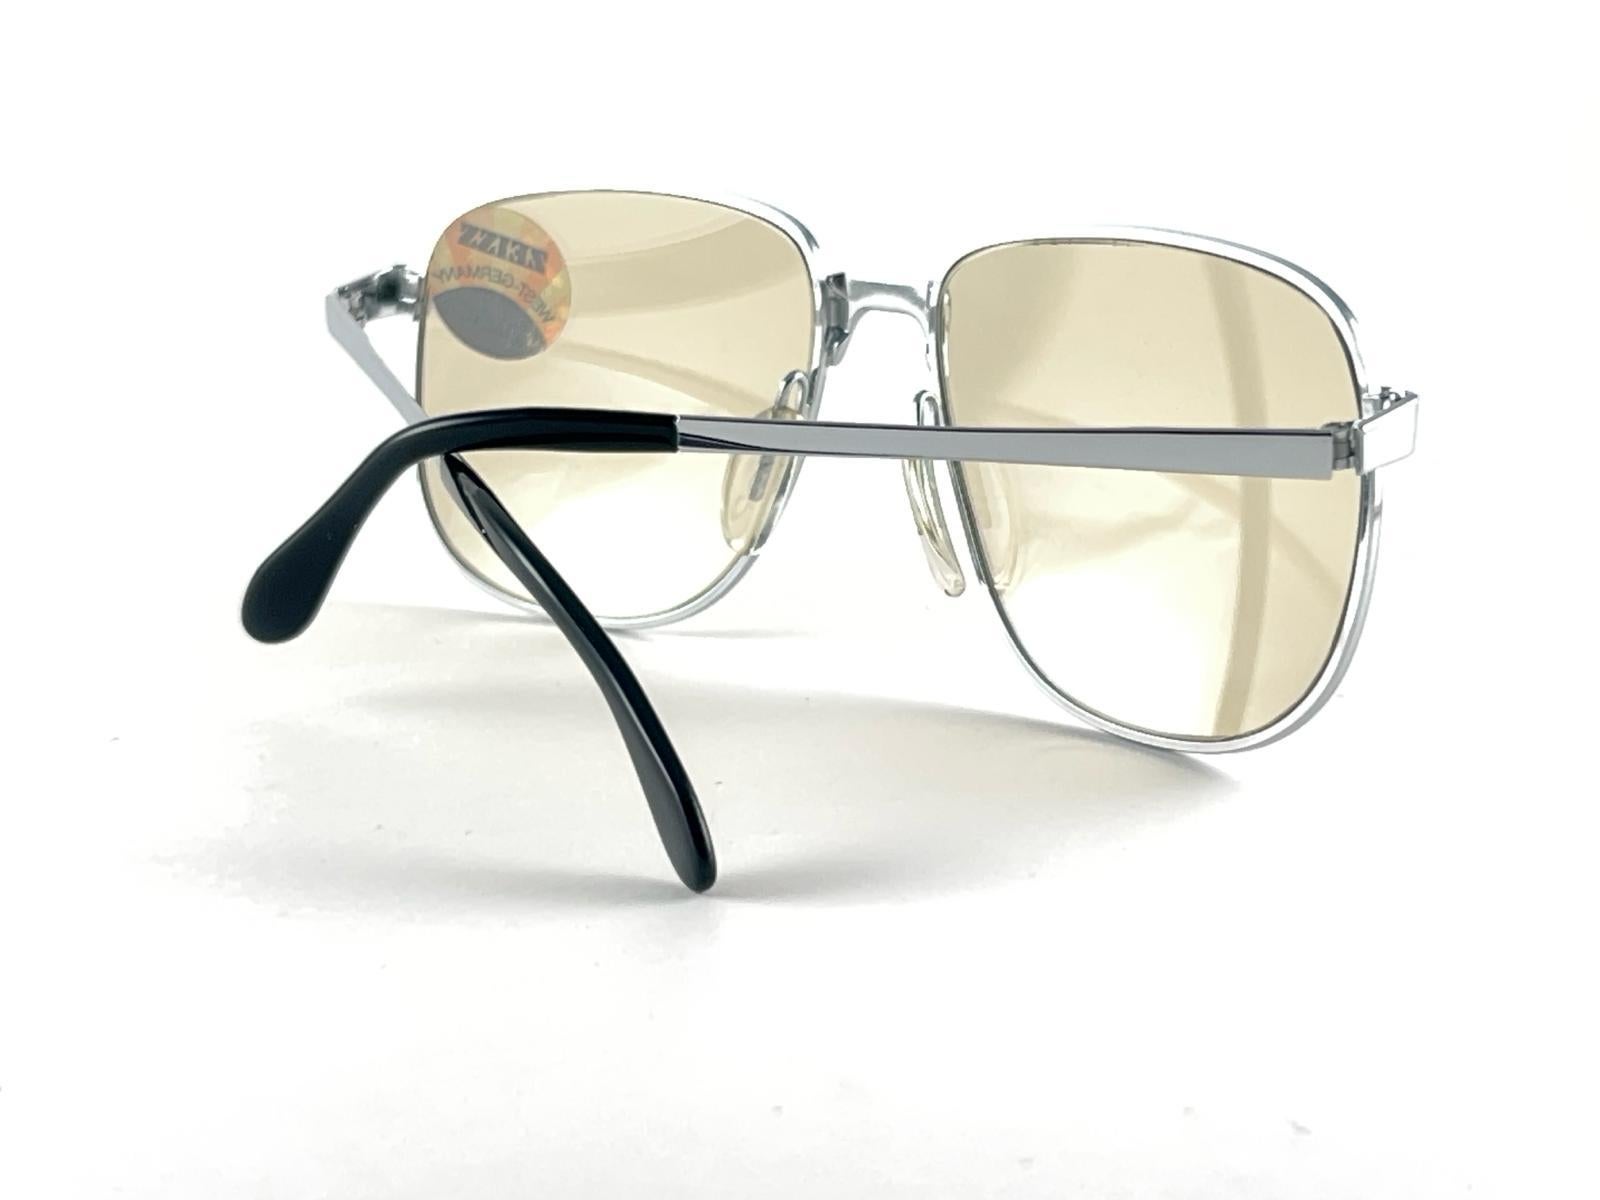 New Vintage Zeiss 9047 Silver Oversized Sunglasses Made in West Germany For Sale 2